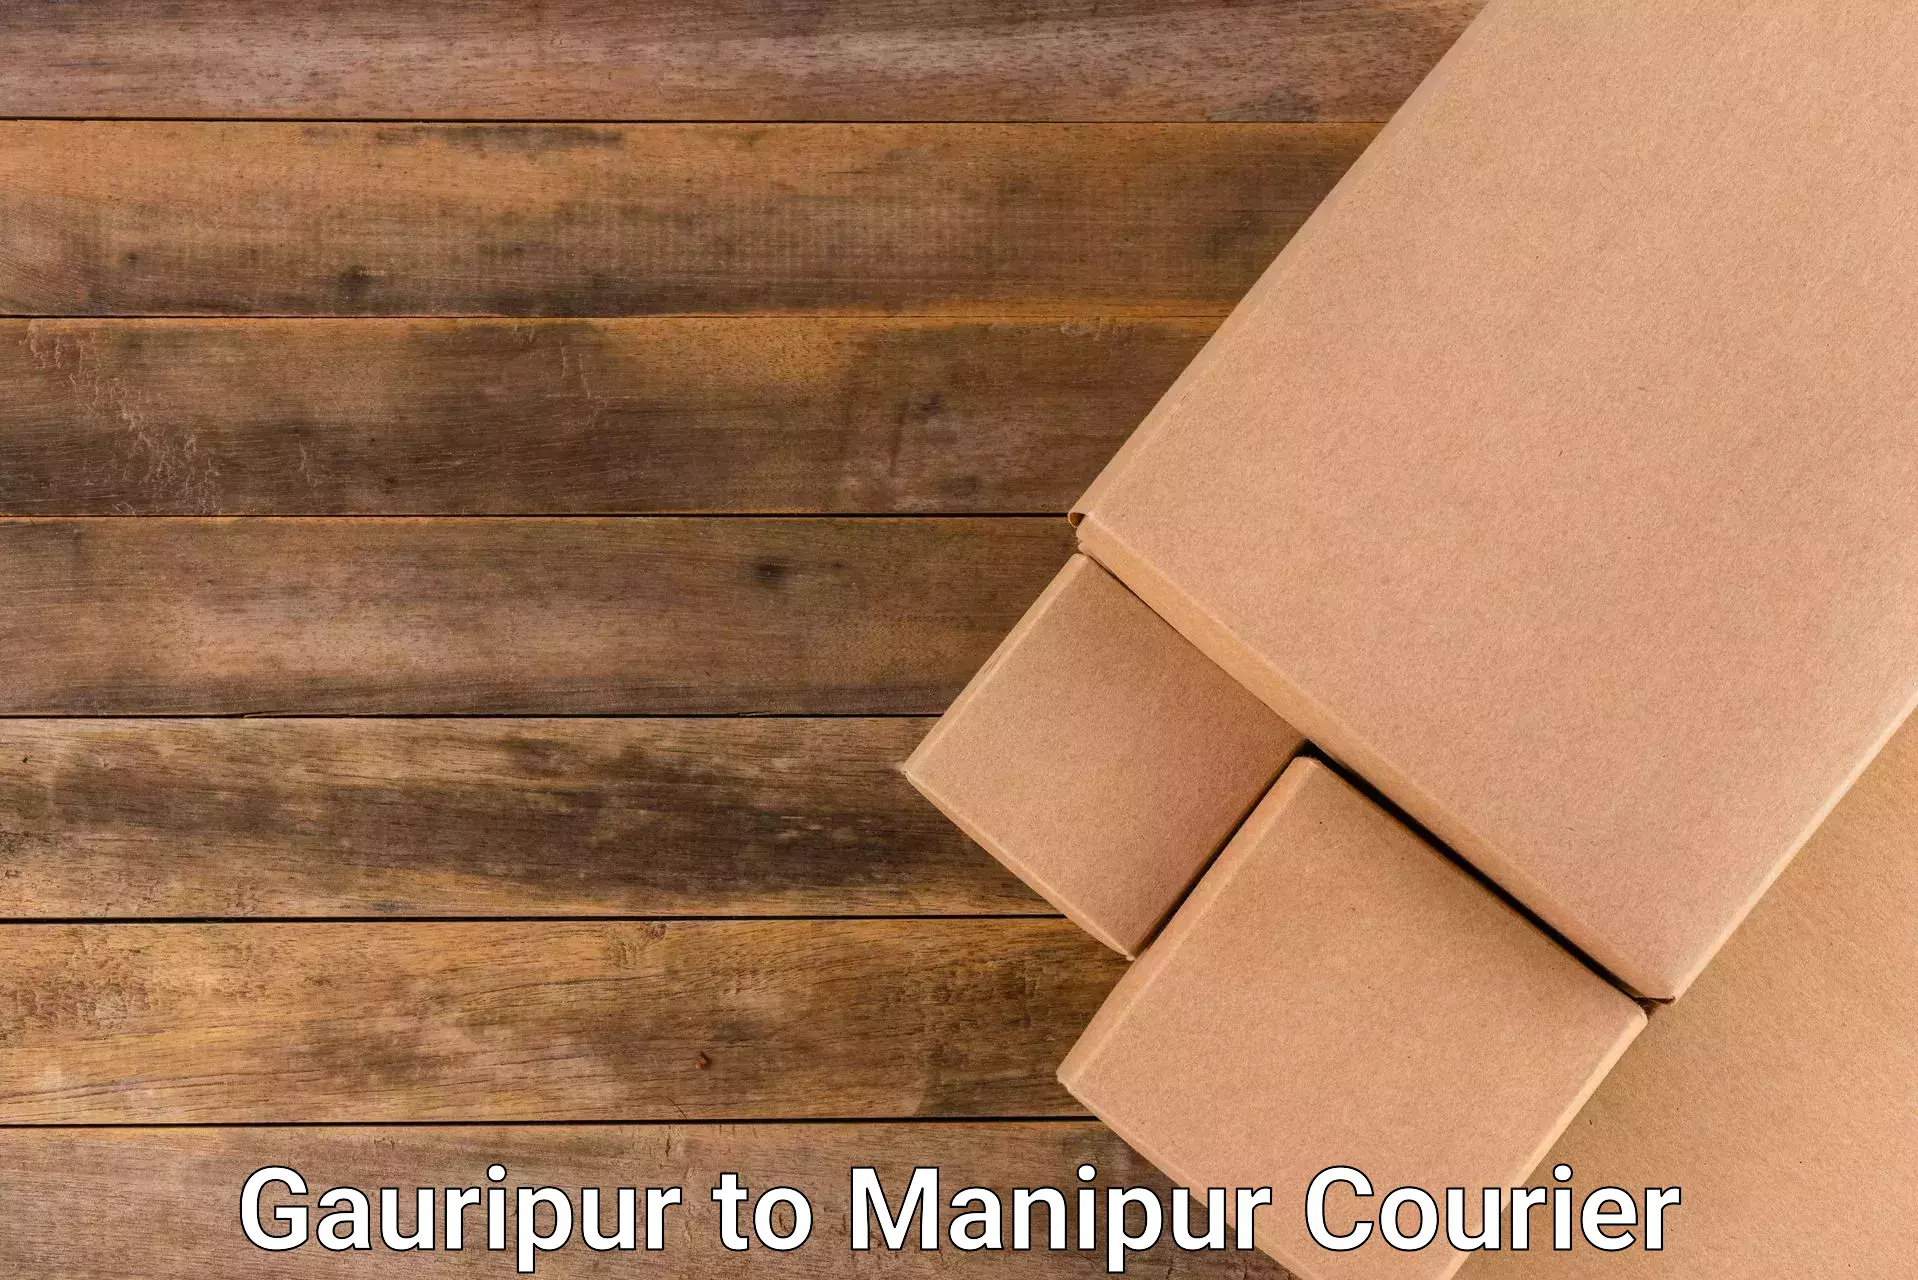 Courier service comparison Gauripur to Kanti